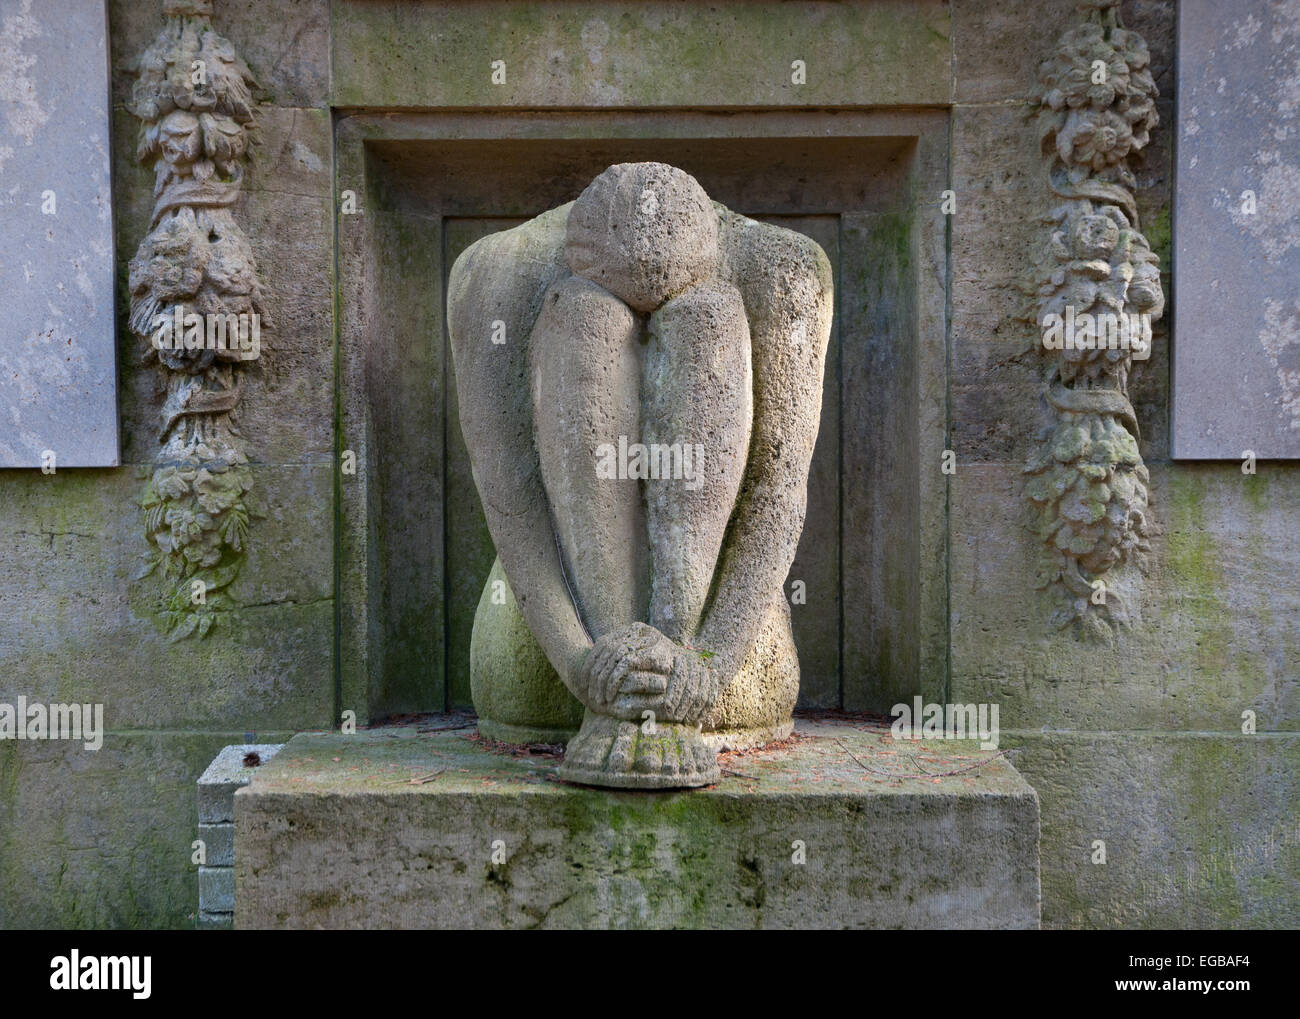 Sculpture of grieving figure on tomb in Stahnsdorf Cemetery, Germany Stock Photo